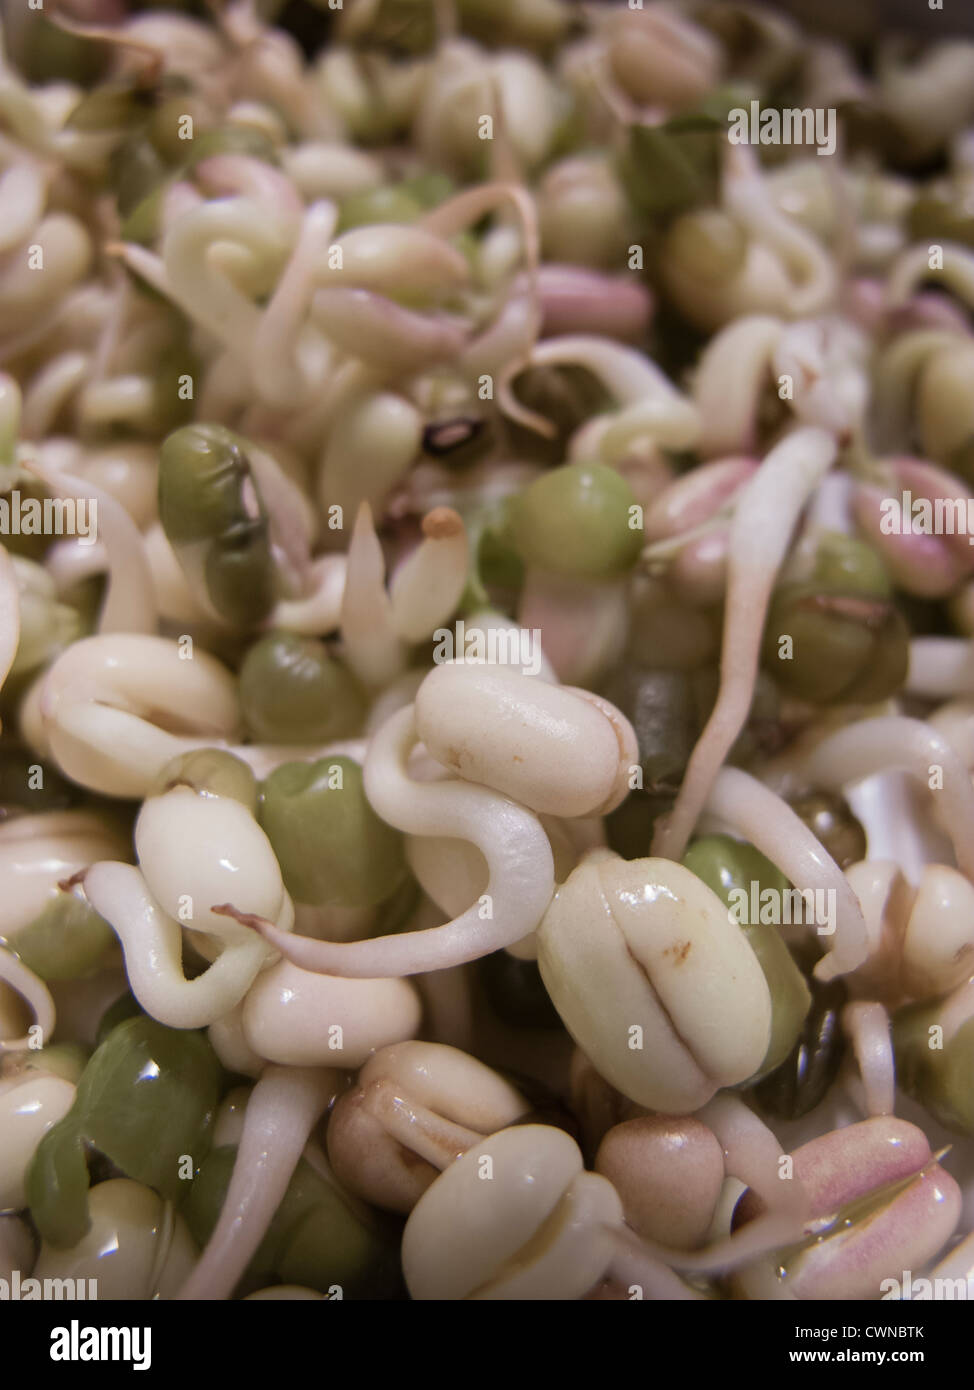 Batch of germinated soya sprouts for food. Stock Photo